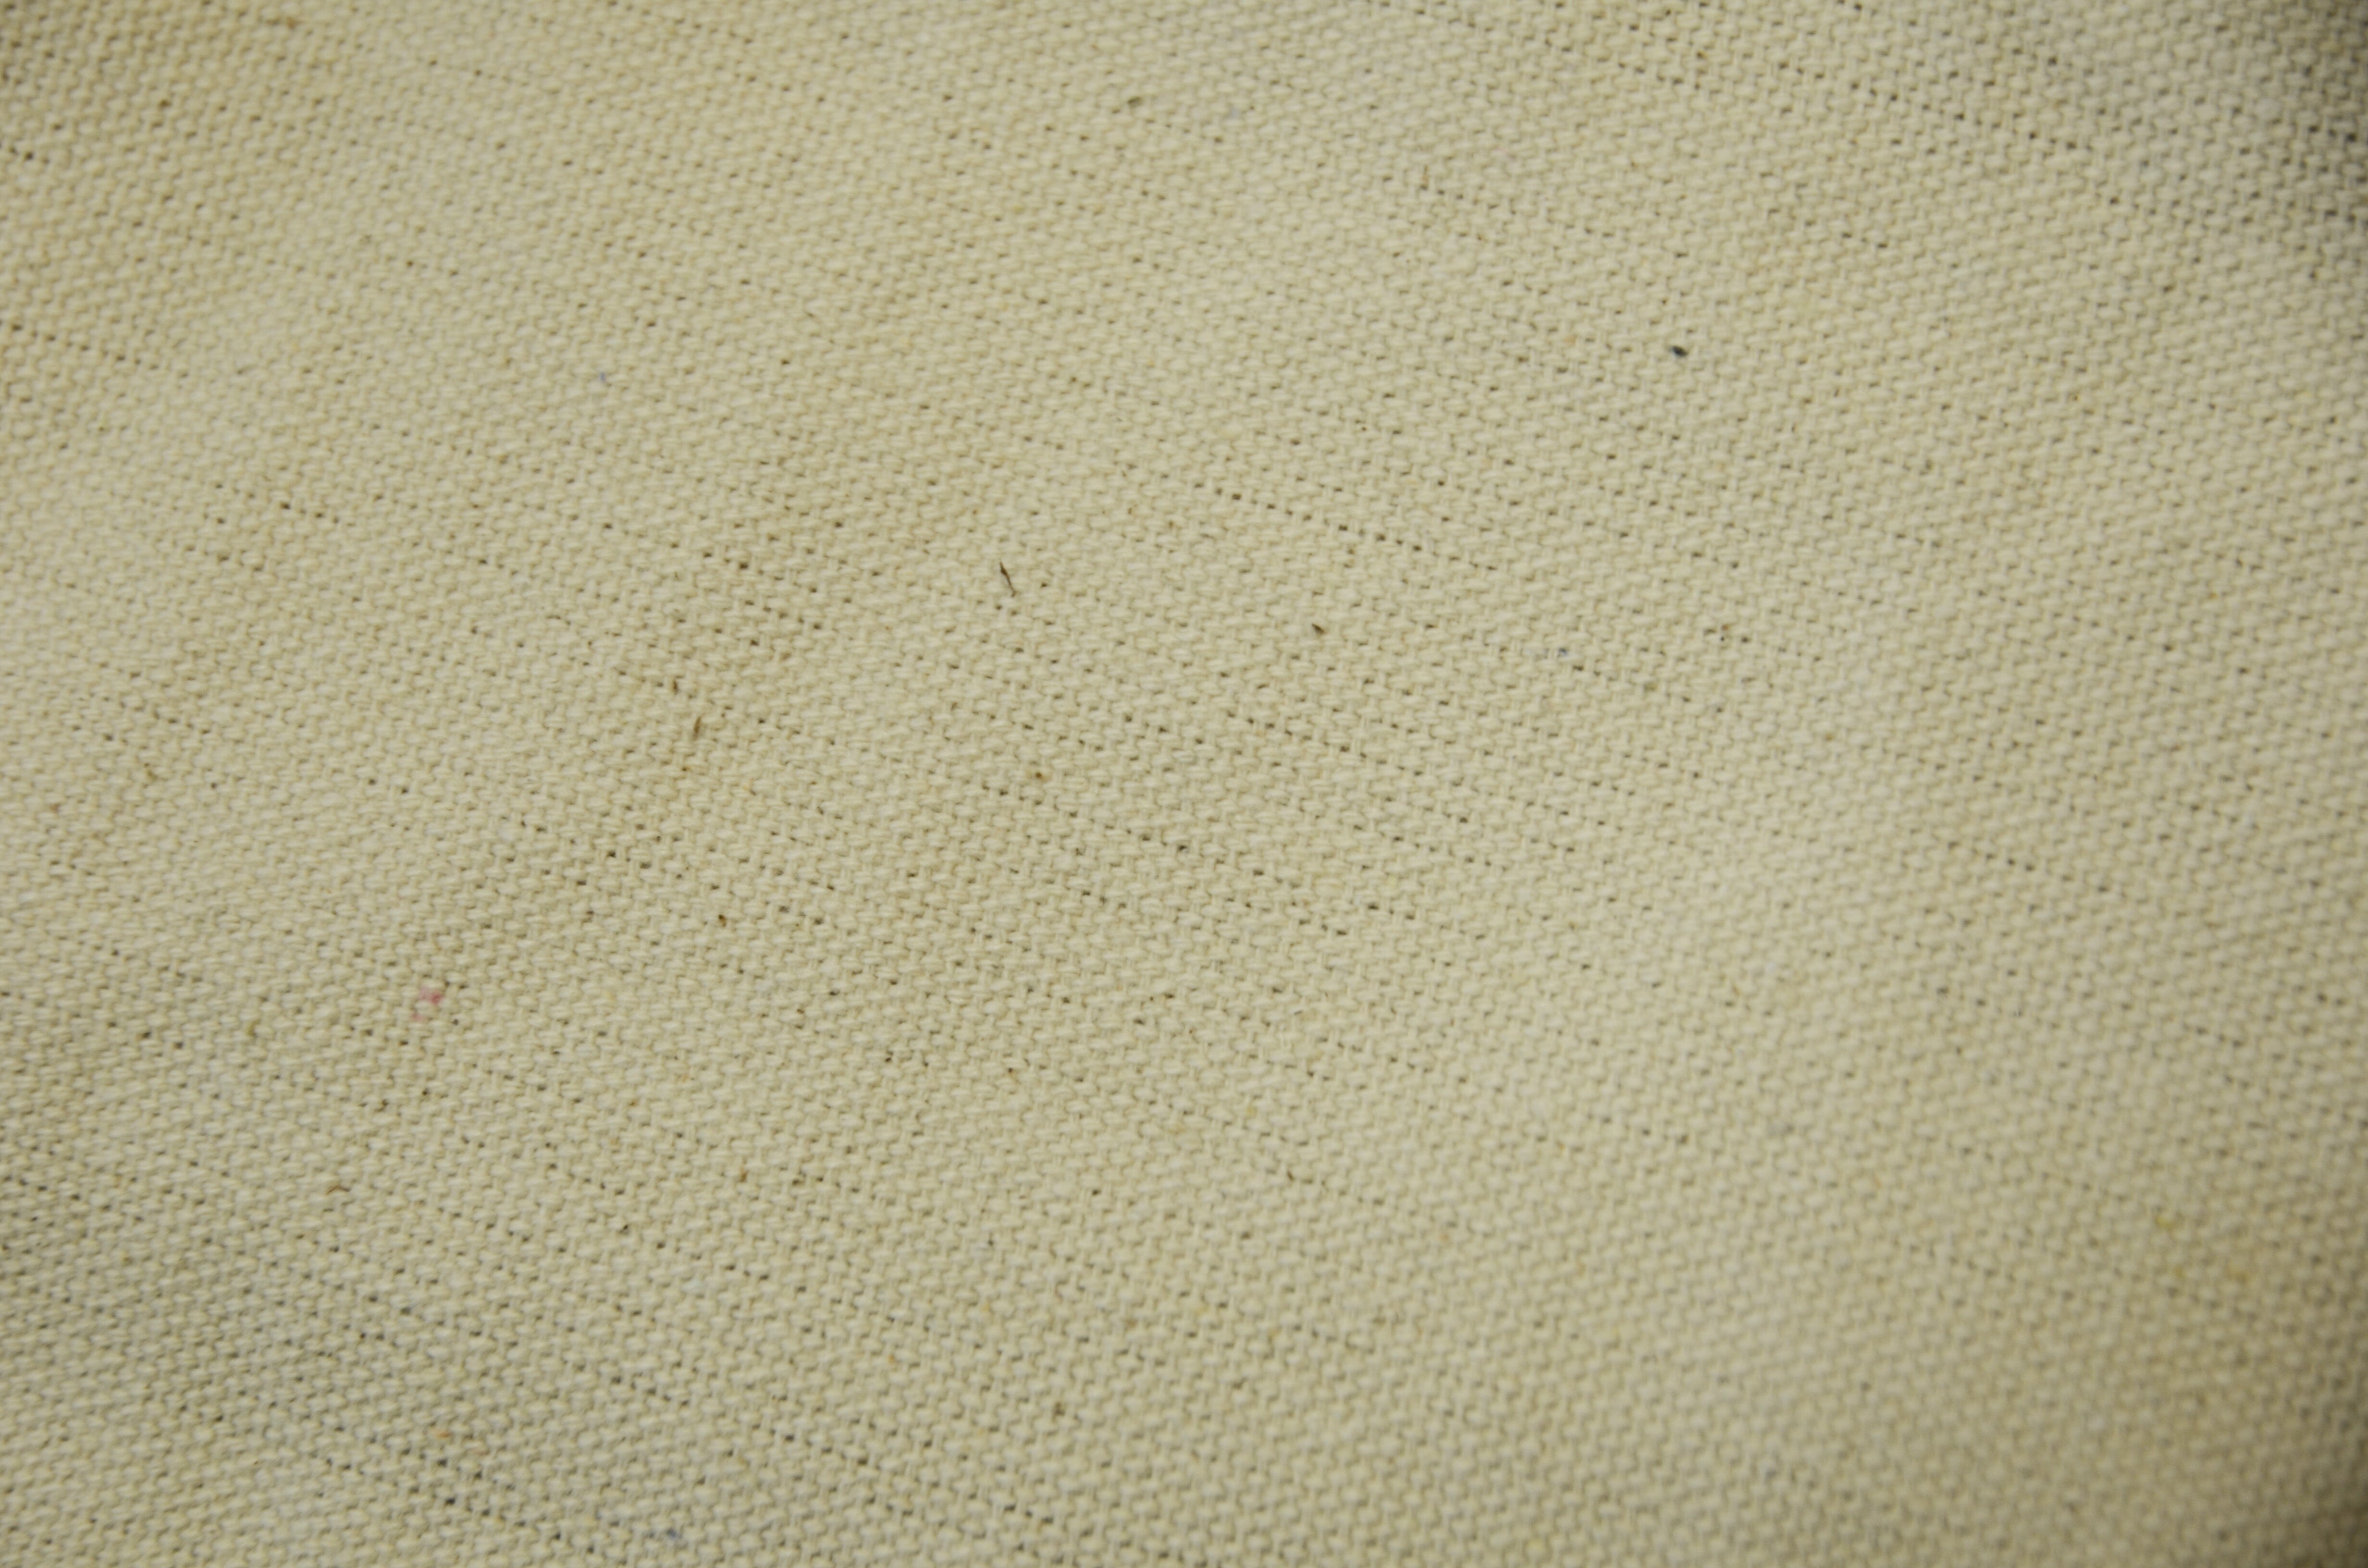 Untreated #10 Duck Canvas  Natural Cotton Canvas Material